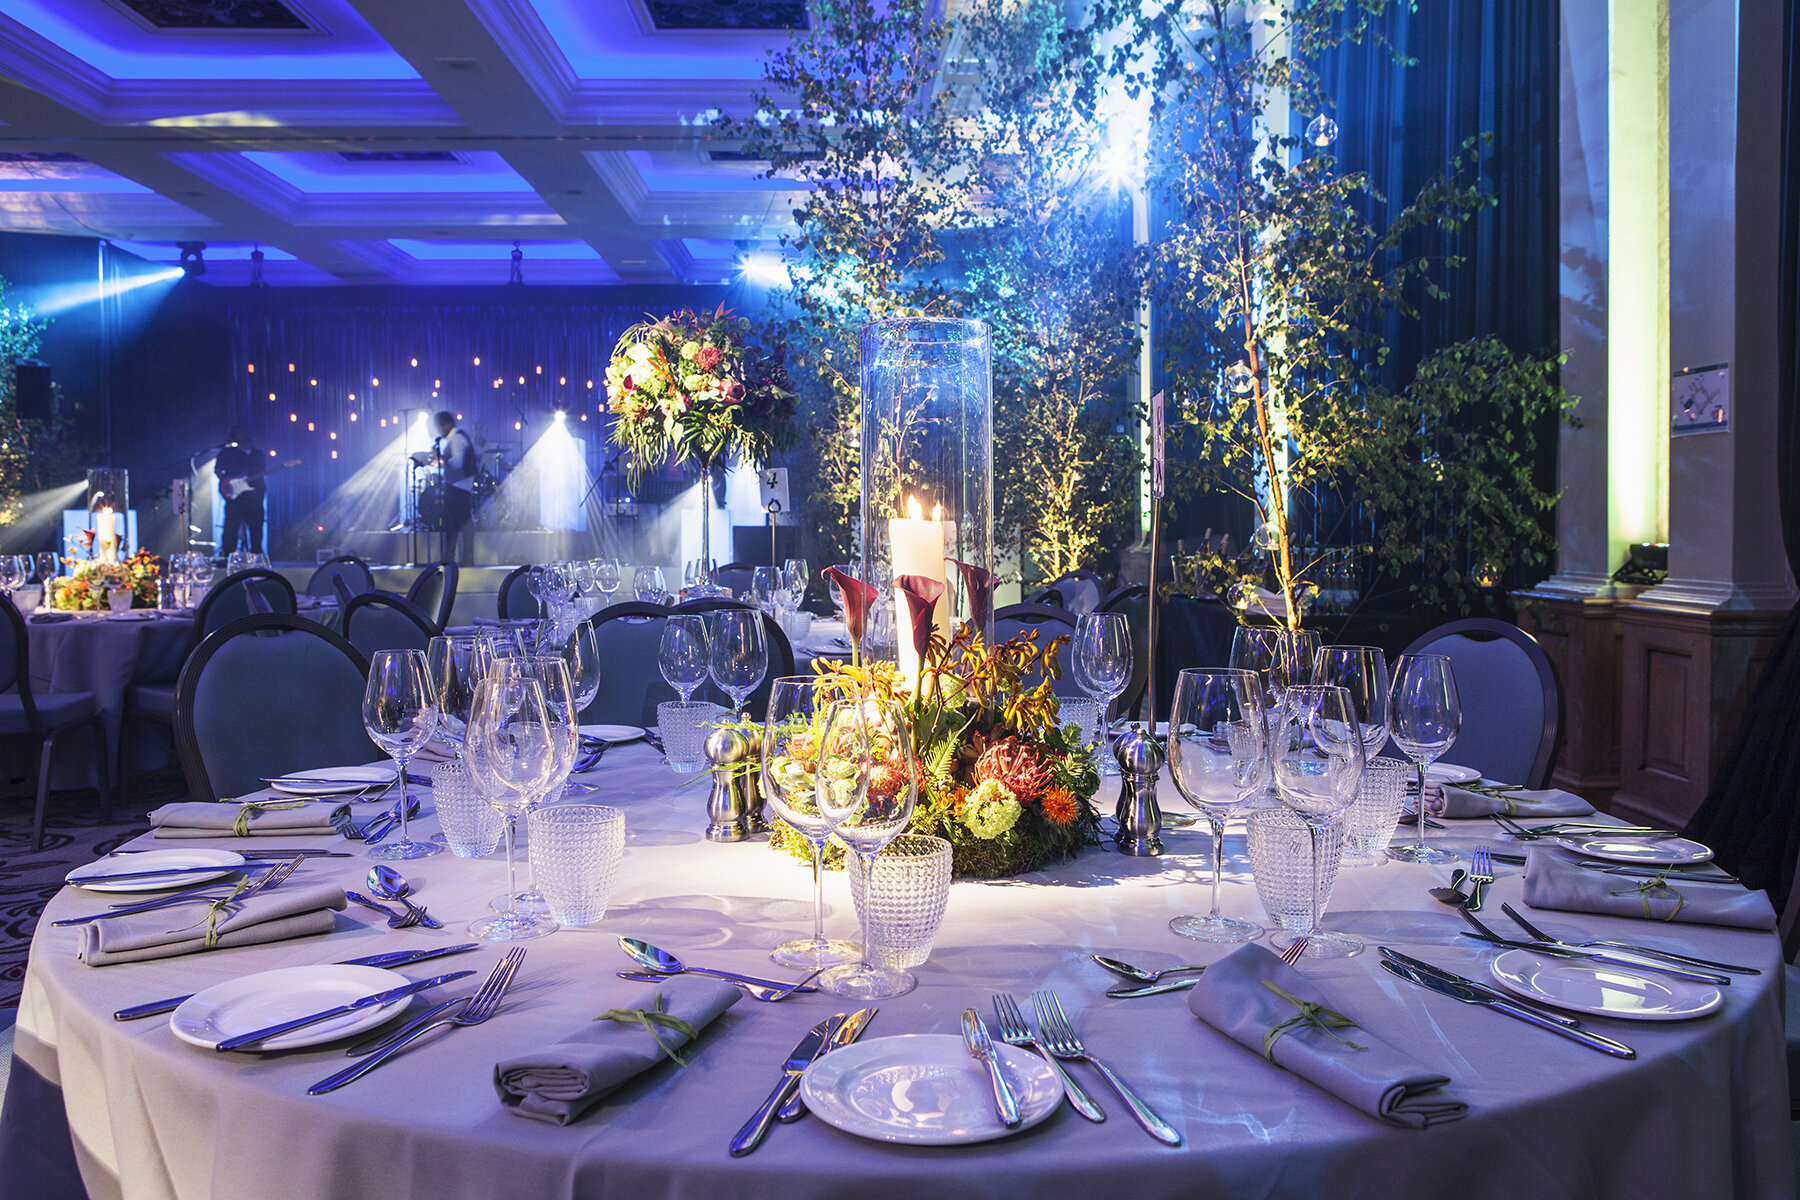 reveries-events-brighton-grand-hotel-private-party-design-management-trees-lighting-sound-staging-entertainment-centre-pieces-linen-technical-production-enchanted-garden.jpg